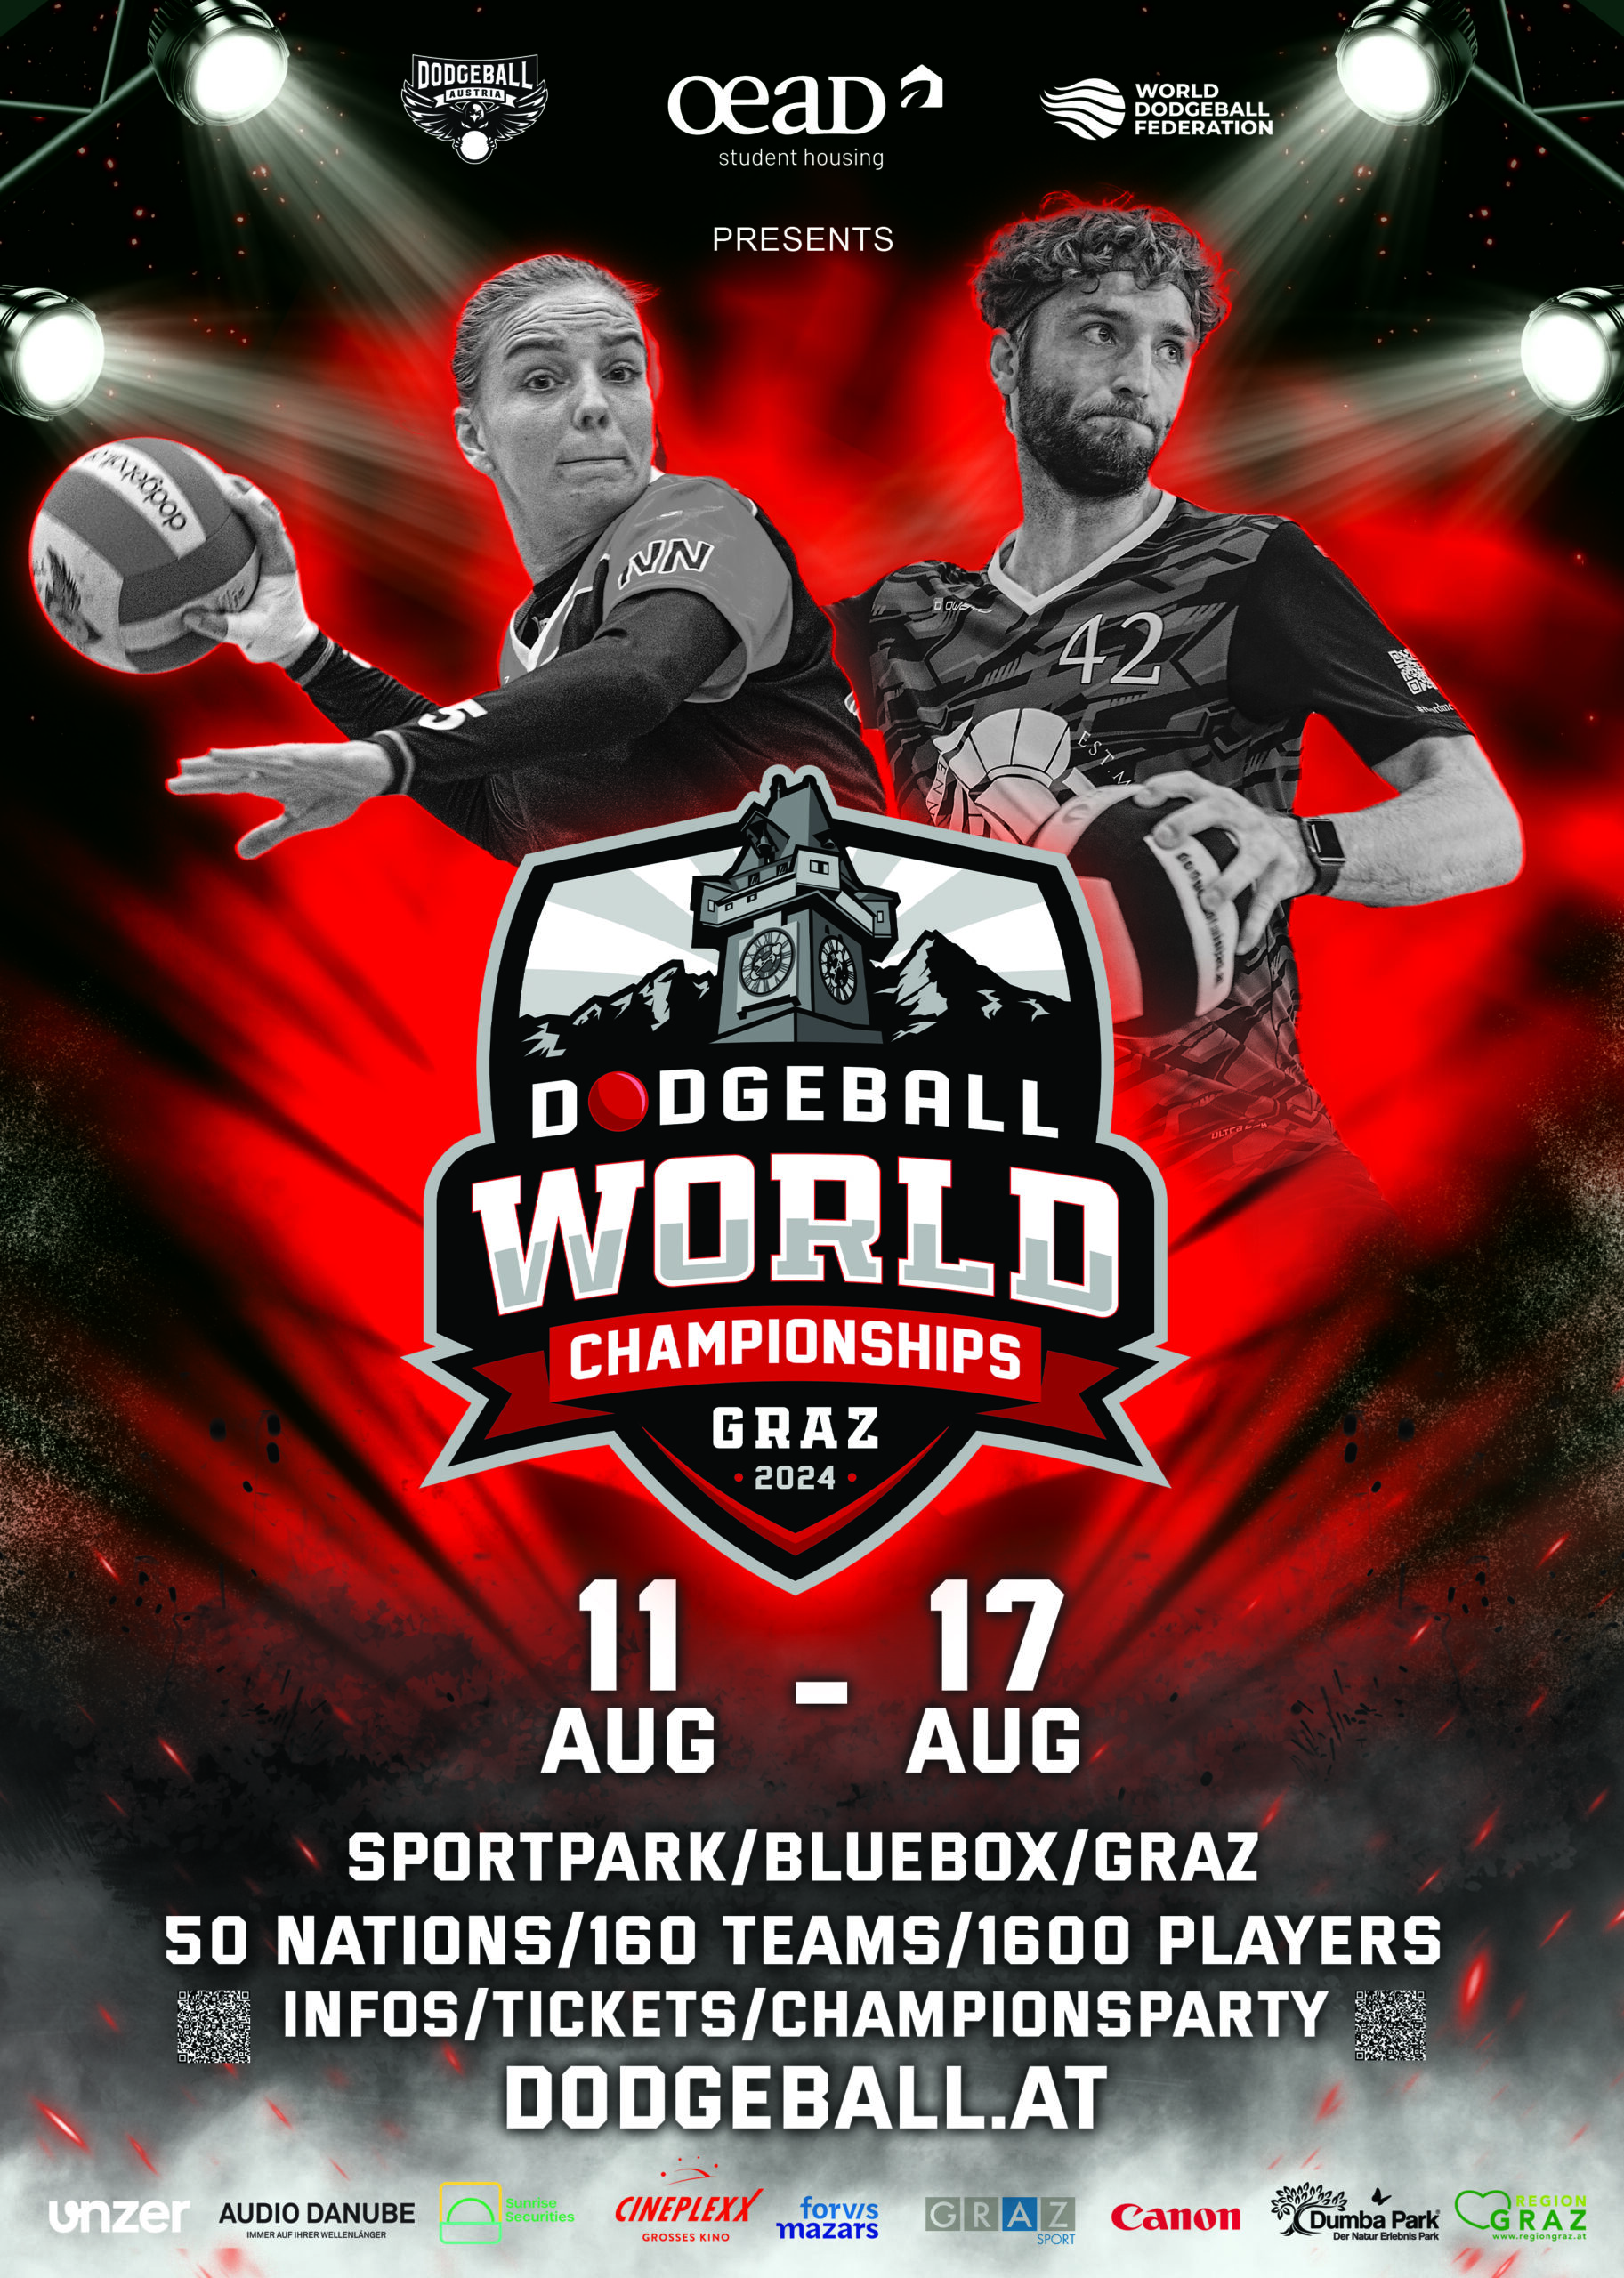 Featured image for “Dodgeball World Championships 2024 in Graz”